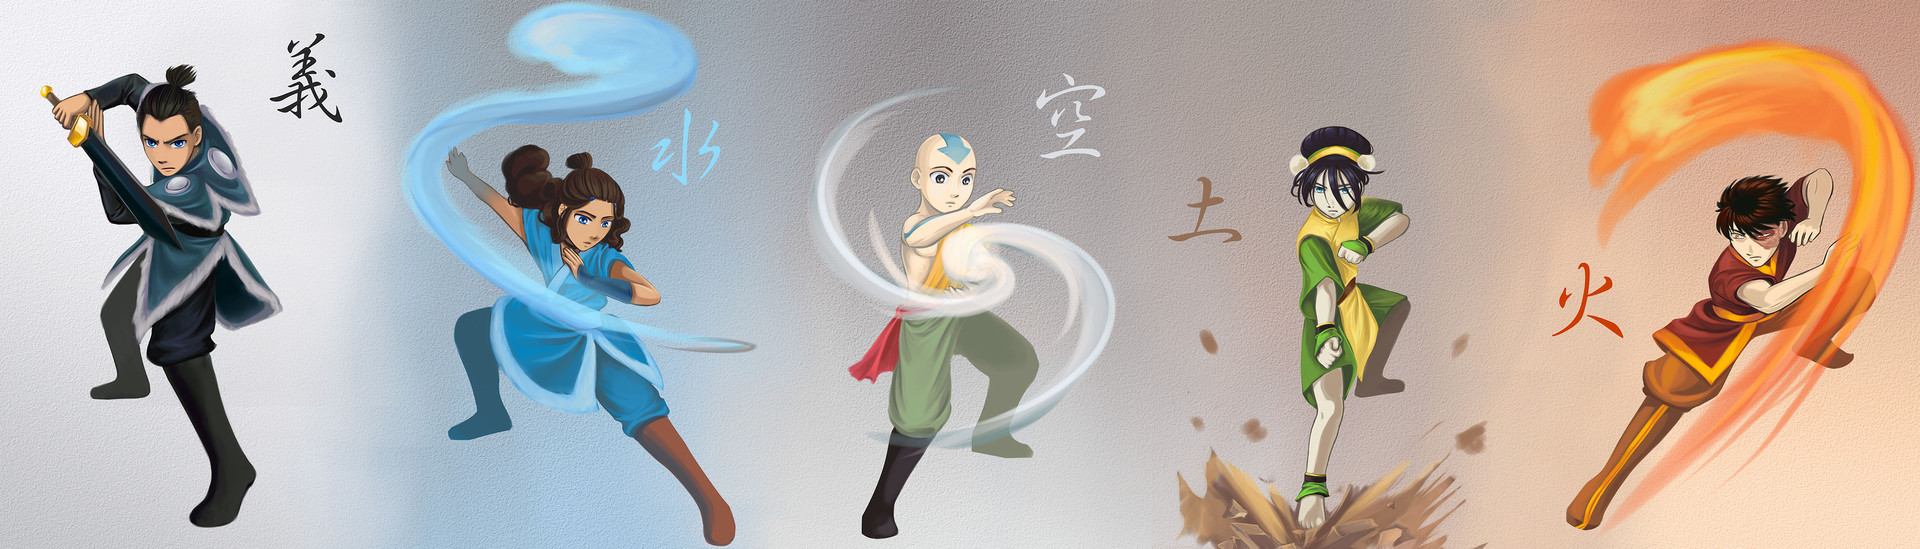 10 Fan Art Pics From Avatar The Last Airbender Better Than The Actual Show